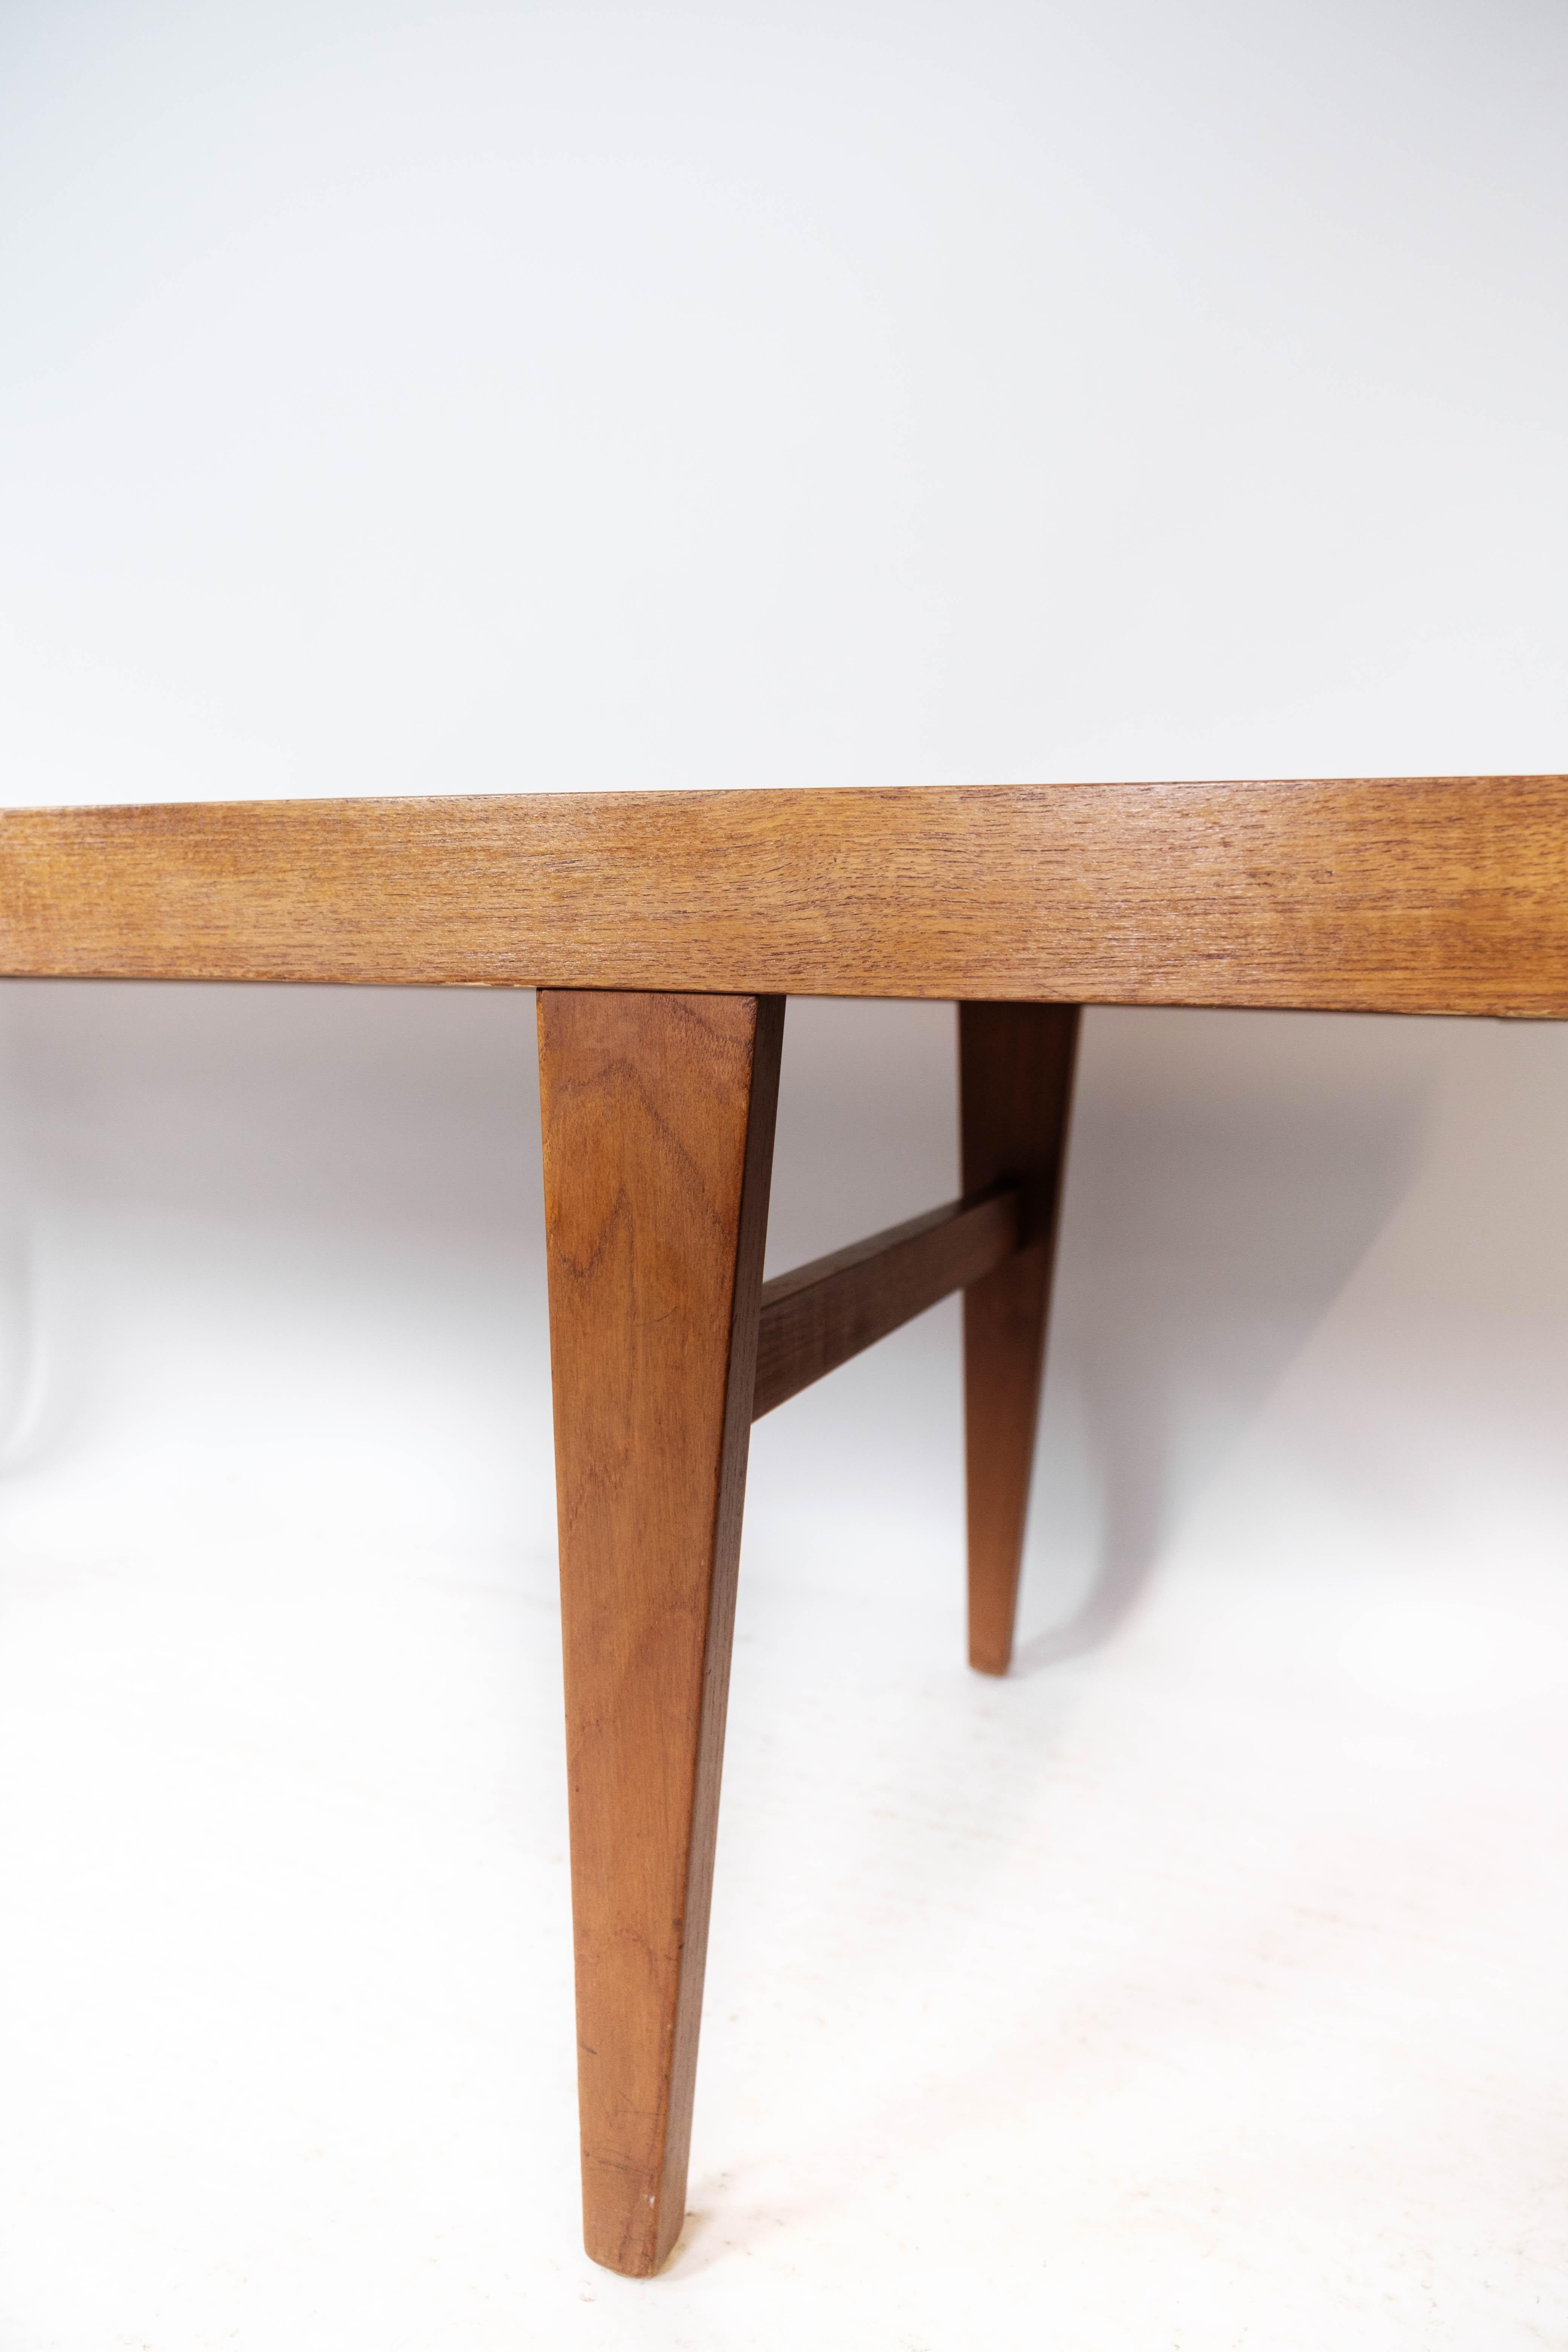 Danish Coffee Table Made In Teak With Drawer From 1960s For Sale